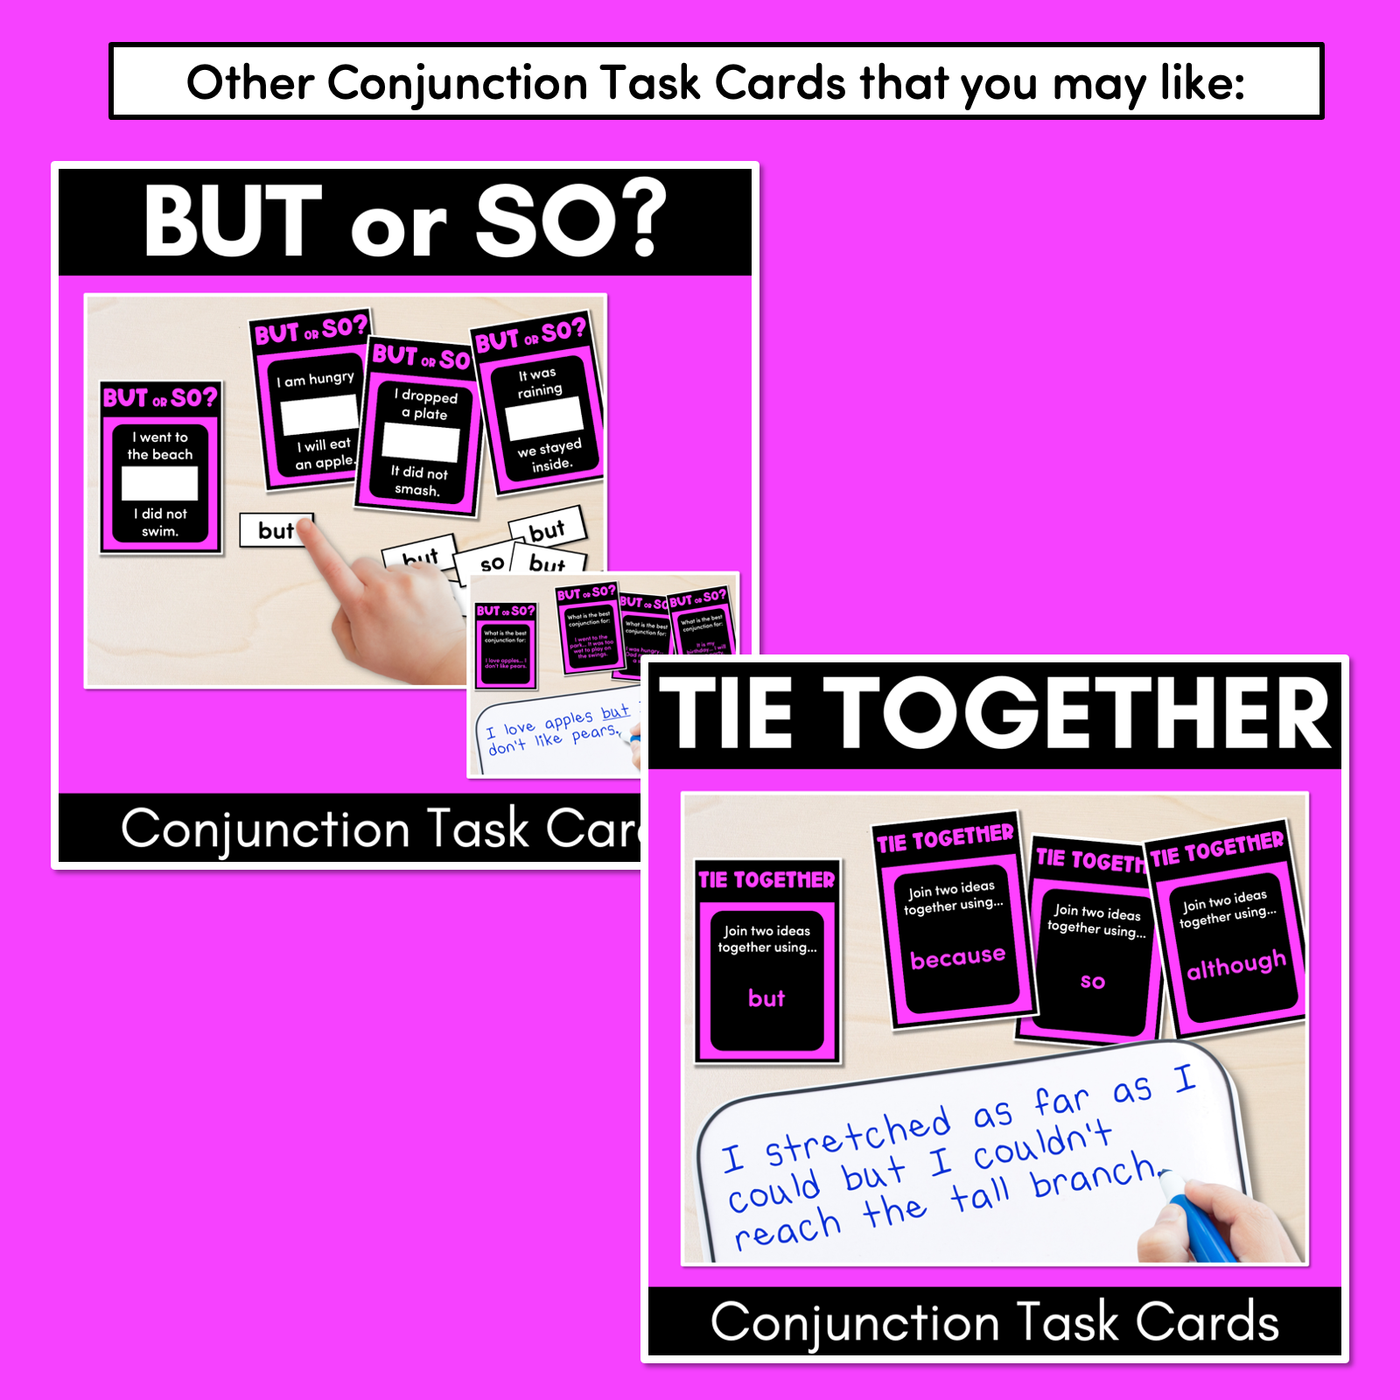 BEFORE or BECAUSE - Conjunction Task Cards - VCOP aligned